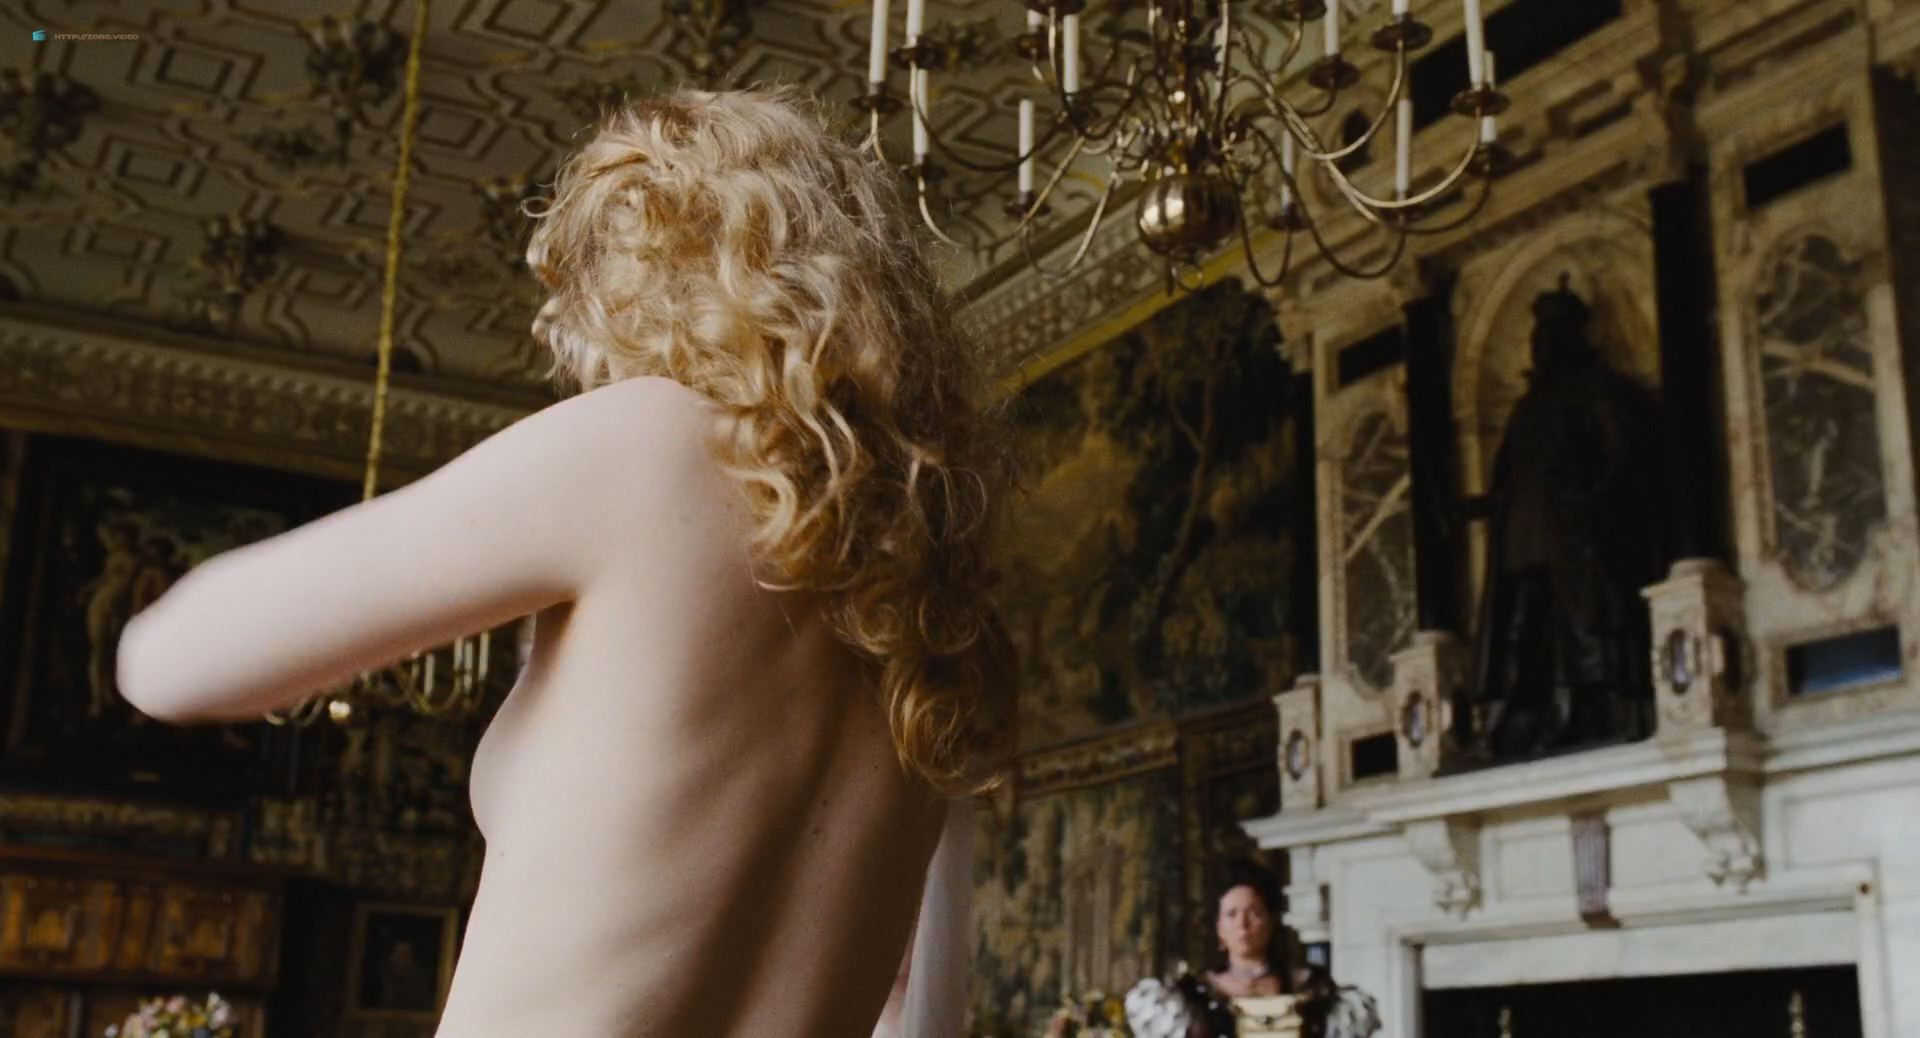 0113024933392_03_Emma-Stone-nude-topless-The-Favorite-2018-HD-1080p-Web-000...